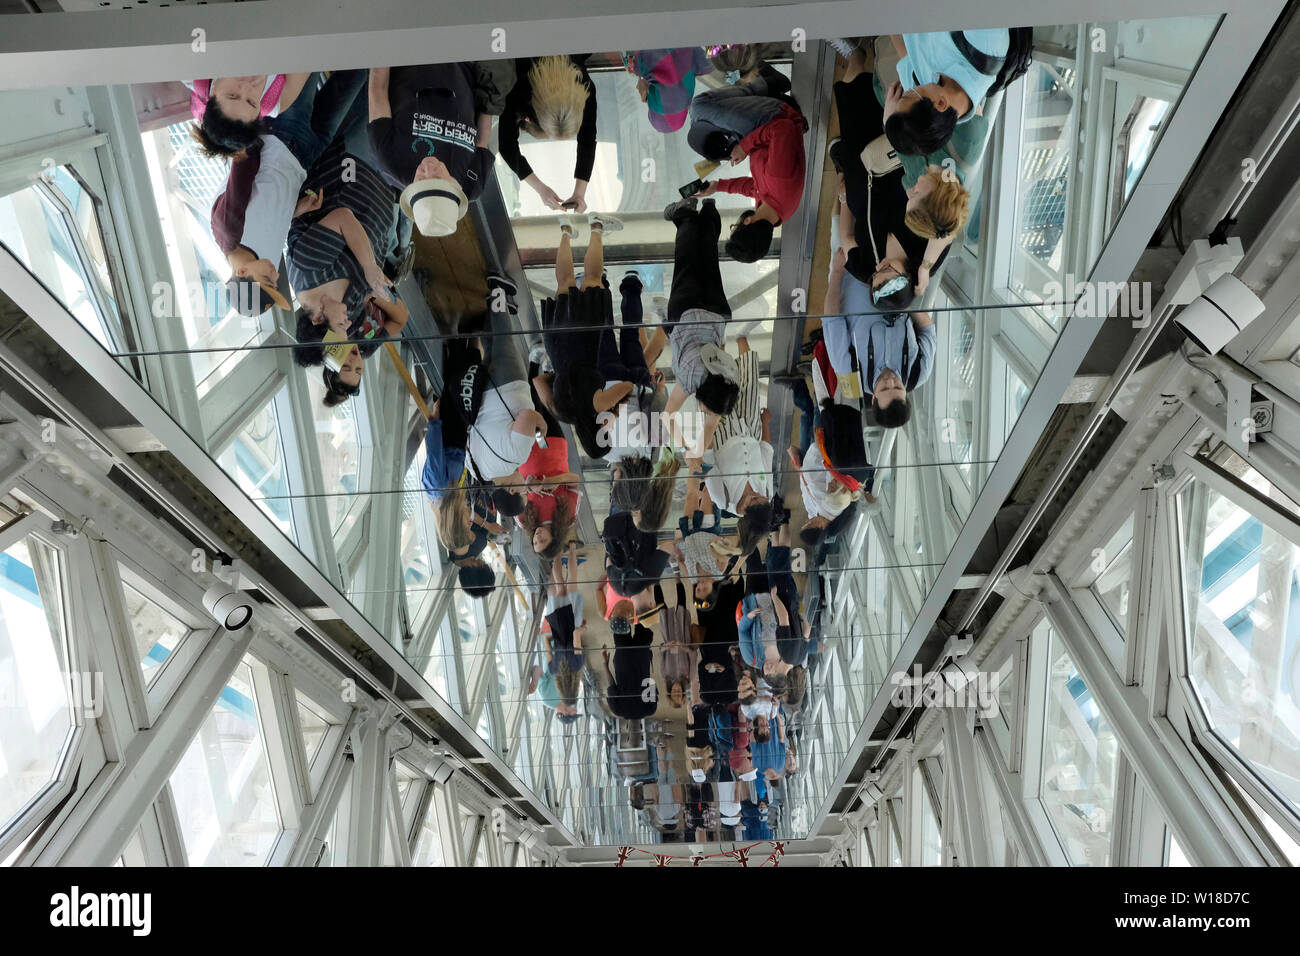 Reflection of people on a ceiling, Tower bridge, London Stock Photo